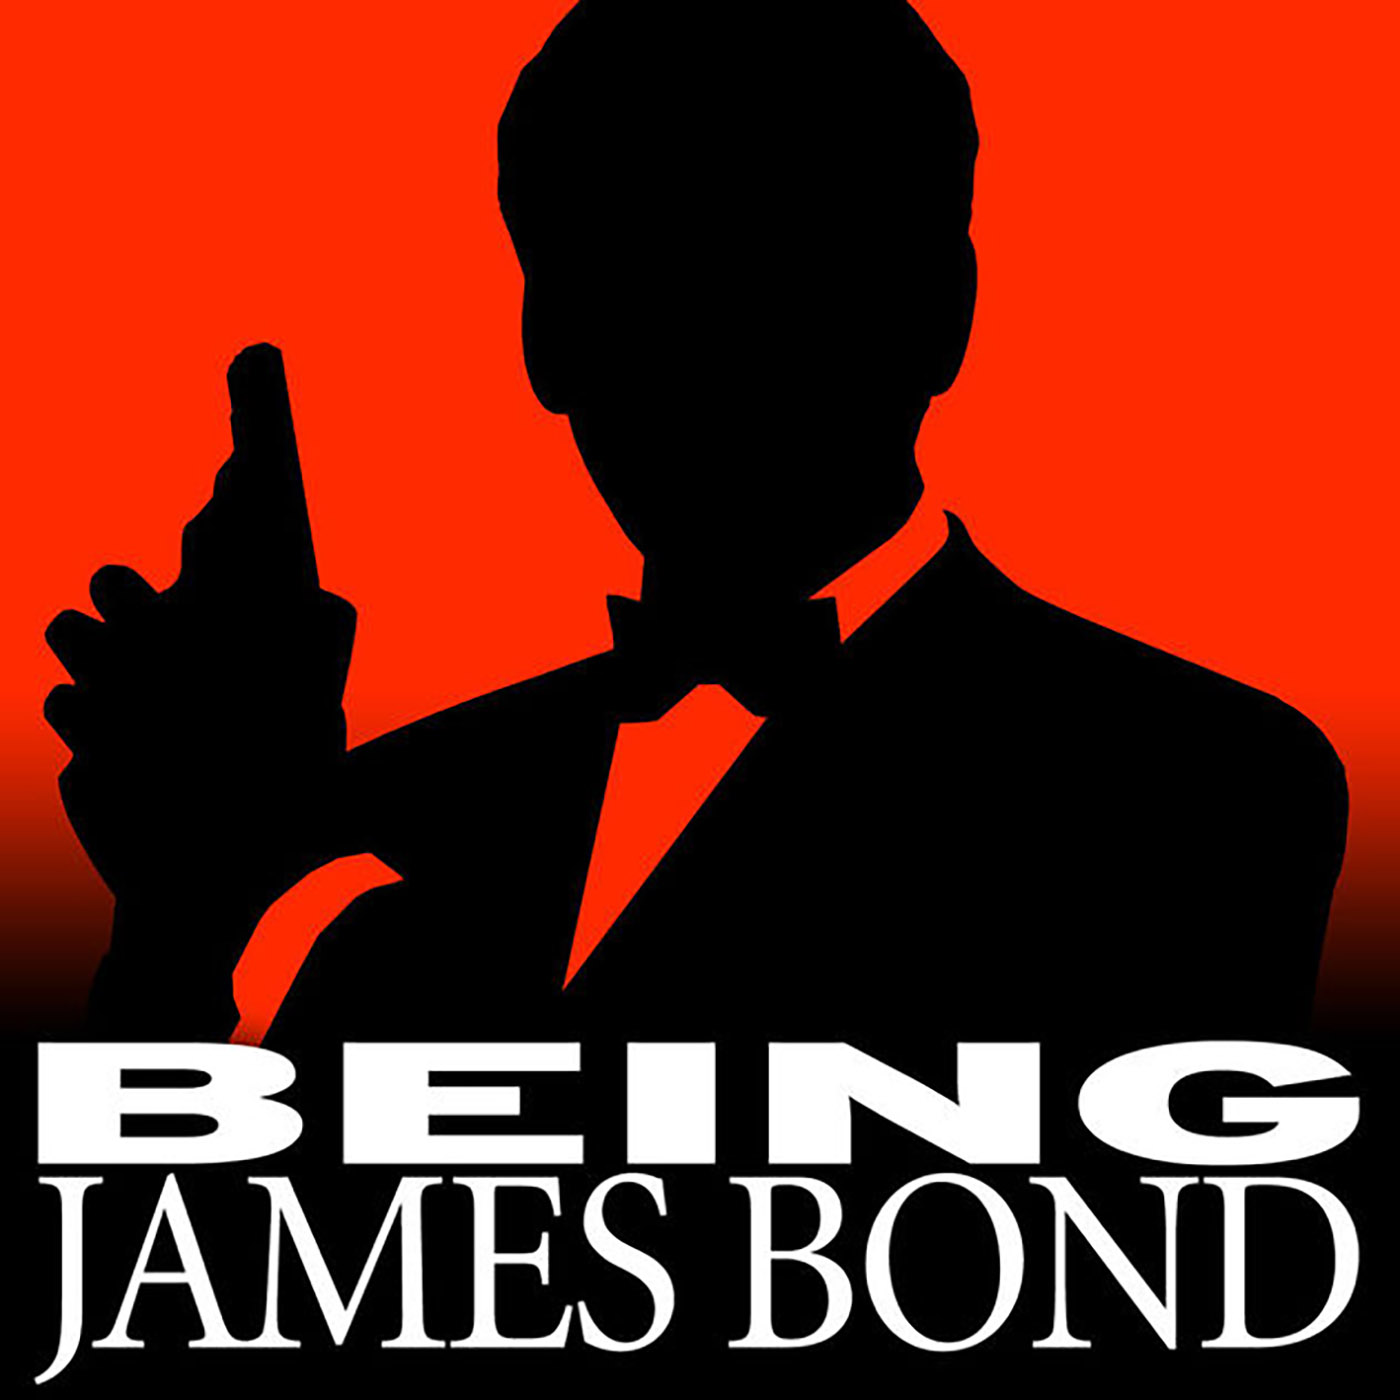 In conversation with Being James Bond | The James Bond Dossier